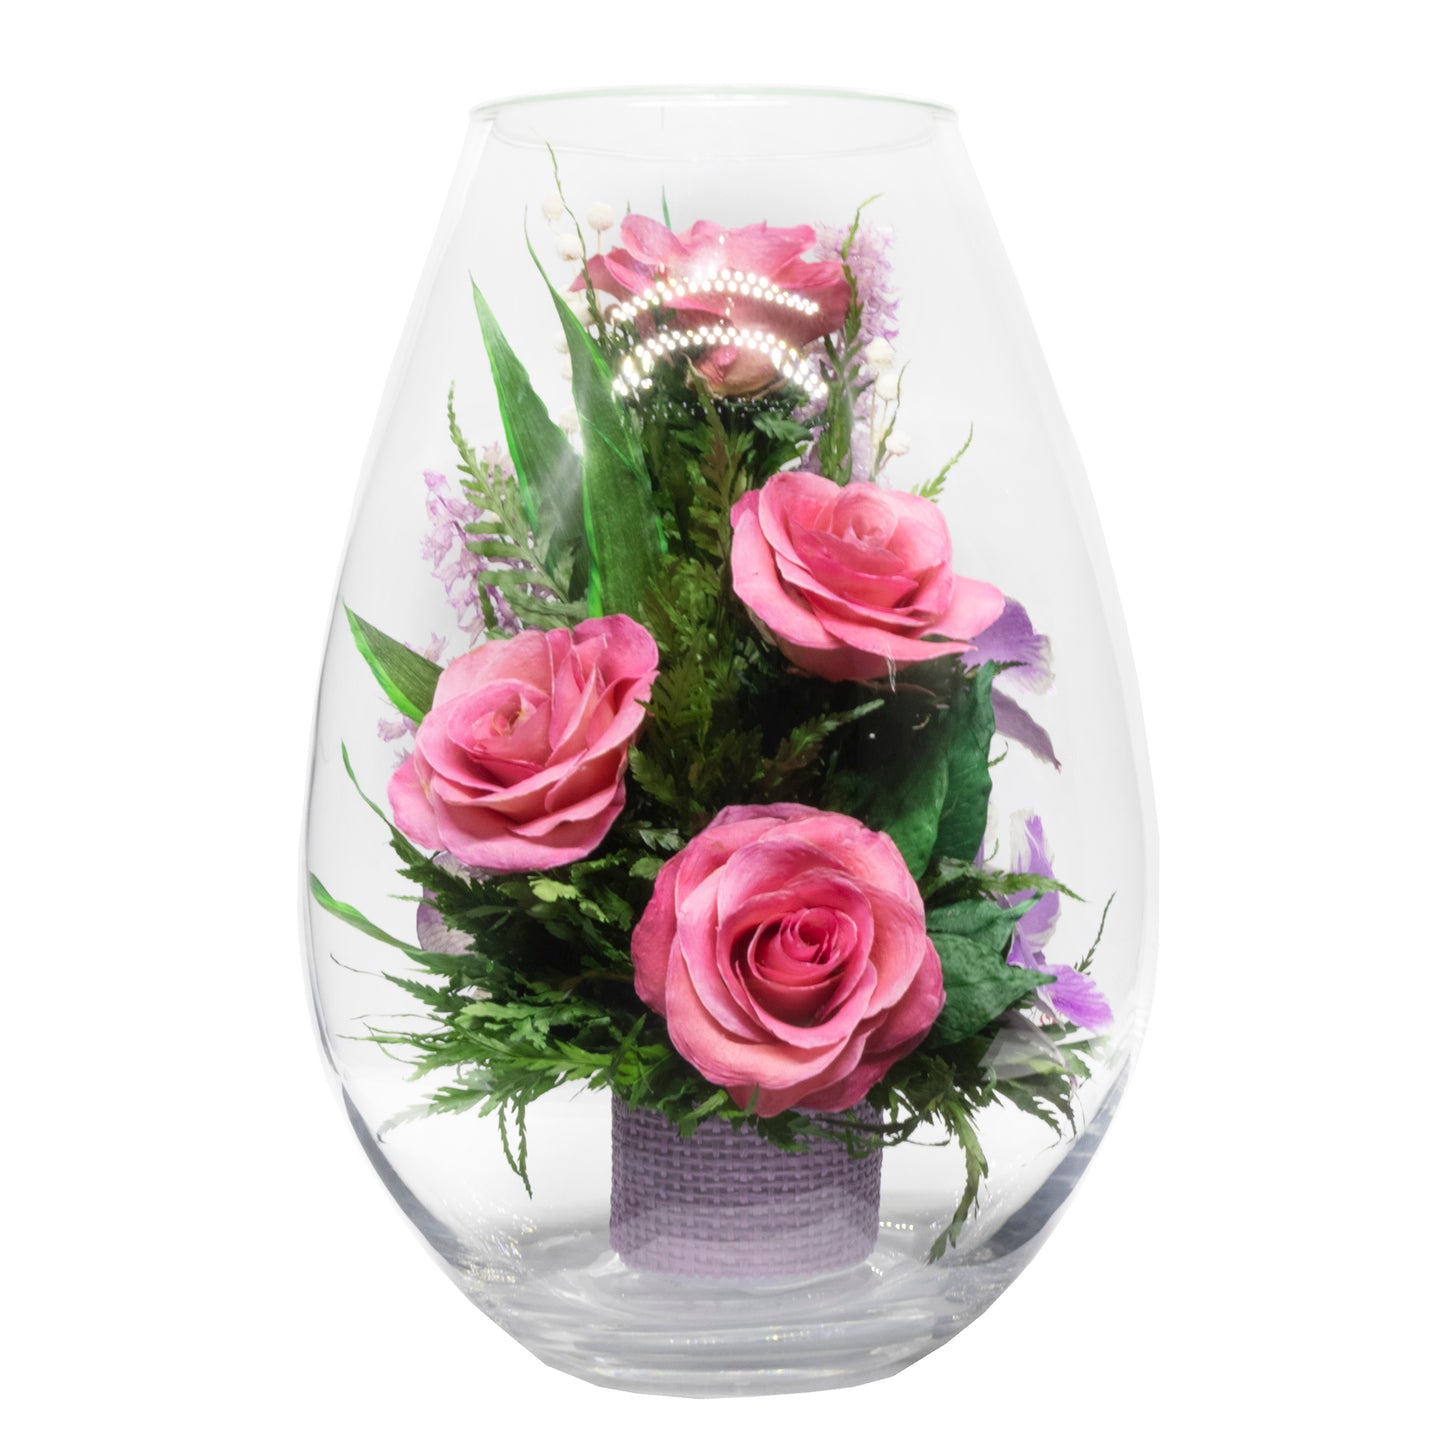 71843 Long-Lasting Pink Roses, Purple-Striped White & King Dragon Orchids in a Droplet Glass Vase